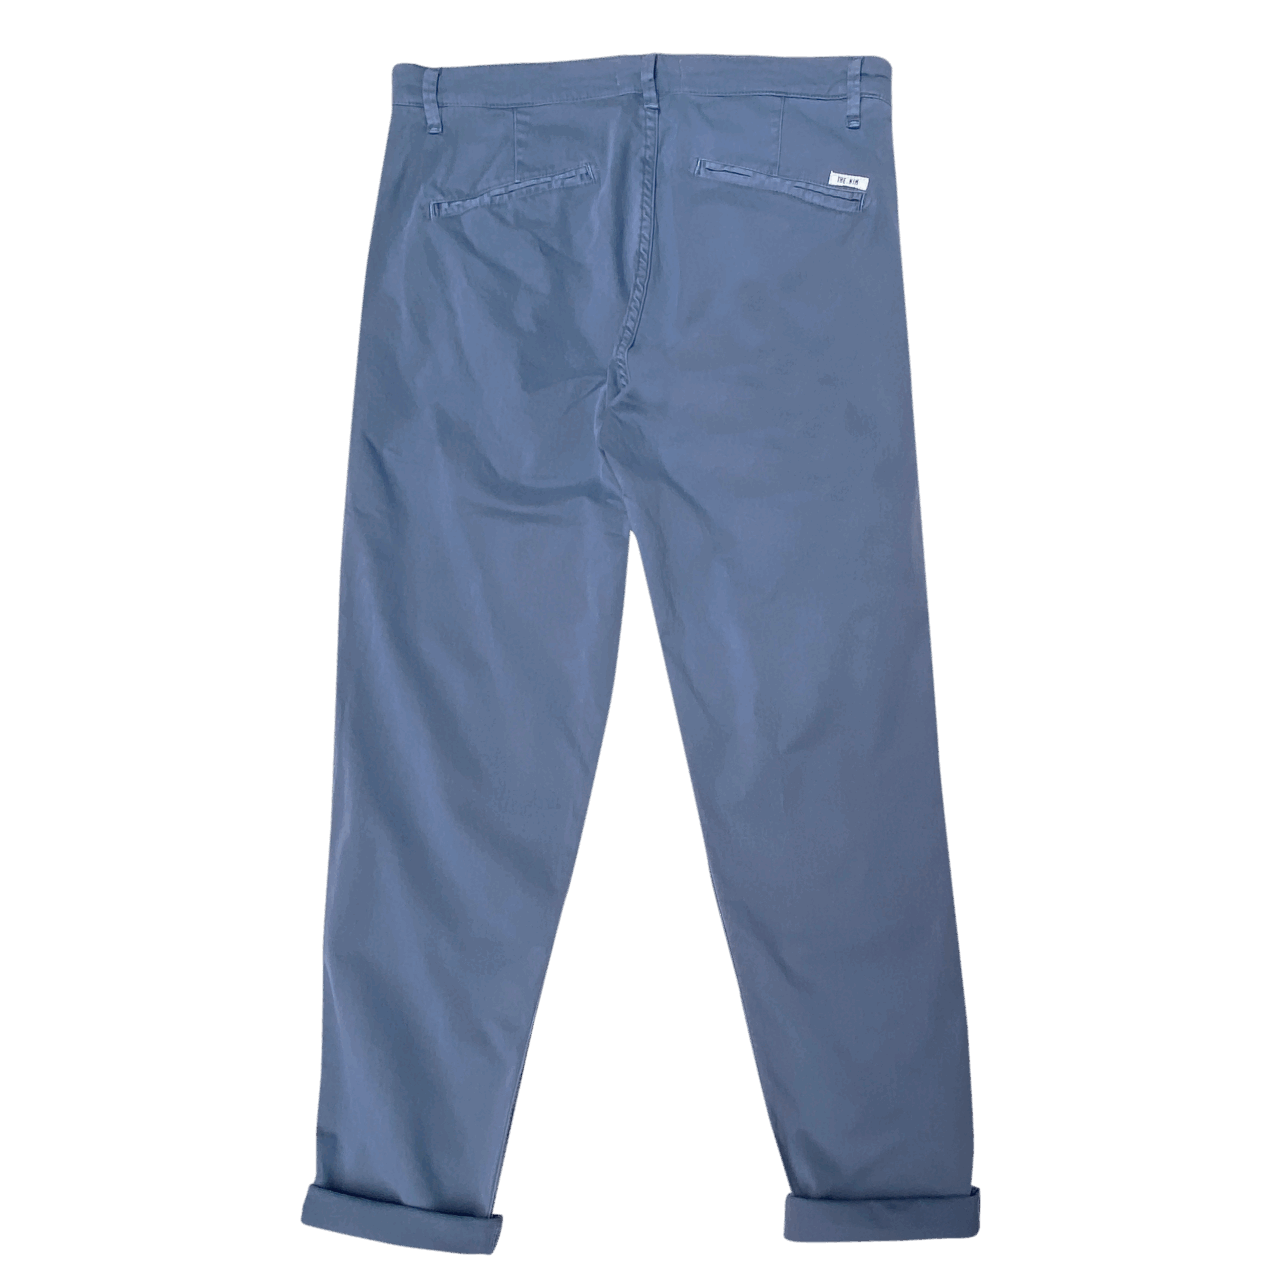 THE.NIM Chino Pince Slim Tapered Fit - mid blue